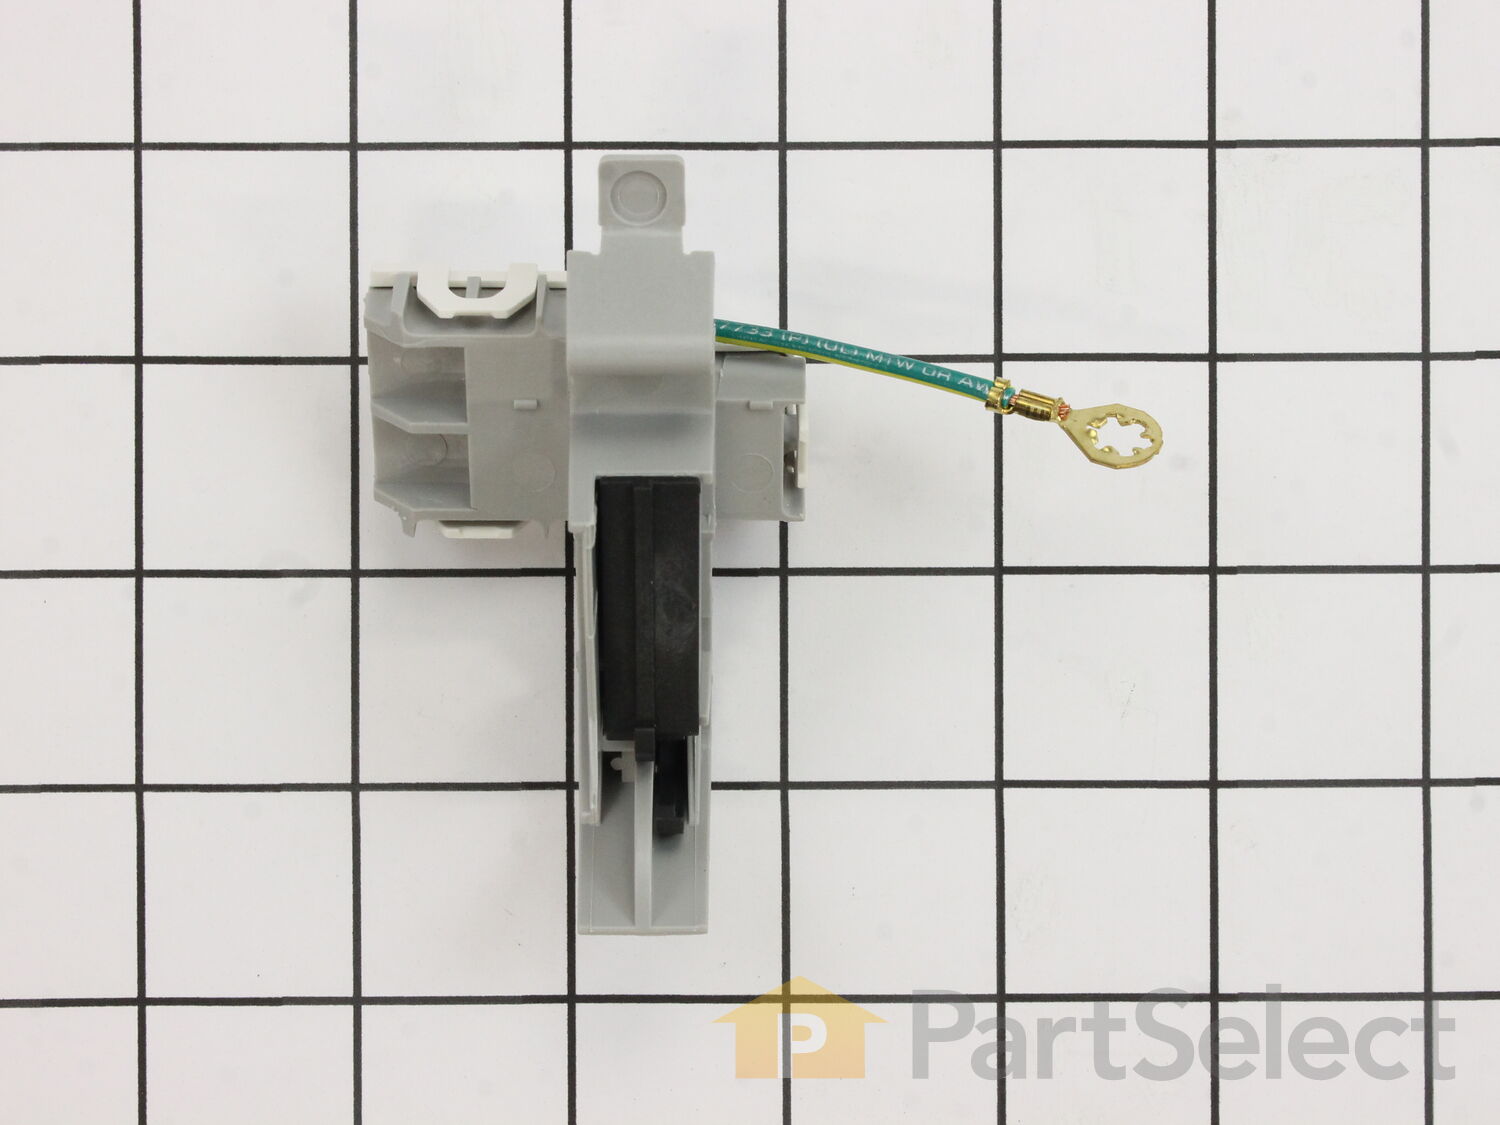 WP8318084 Washer Lid Switch Part for Whirlpool Kenmore Roper Washing Machine 